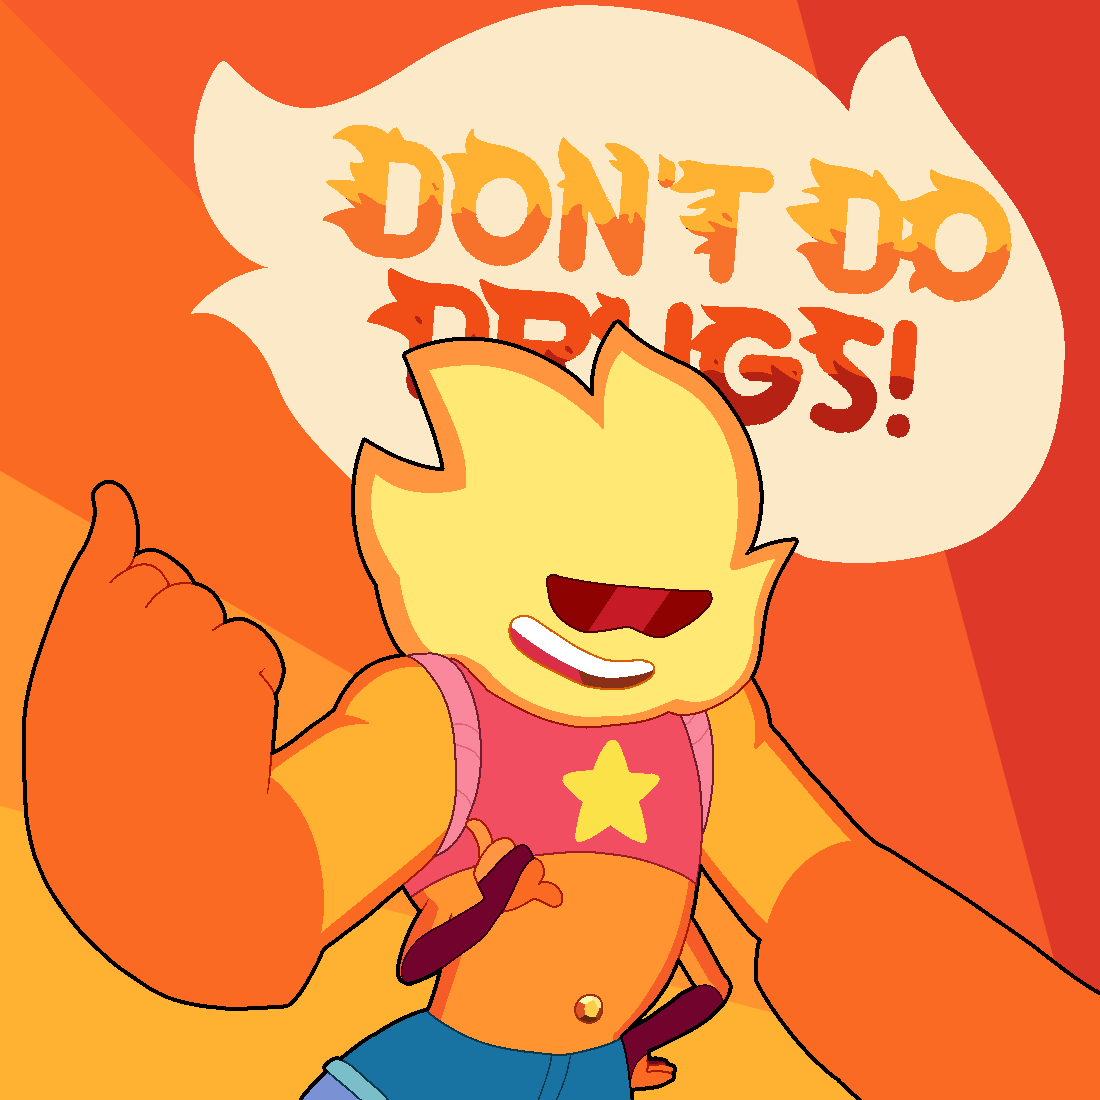 Everyone is doing some sweet fanart for the new ep, and I’m over here making a psa brought to you by Sunstone